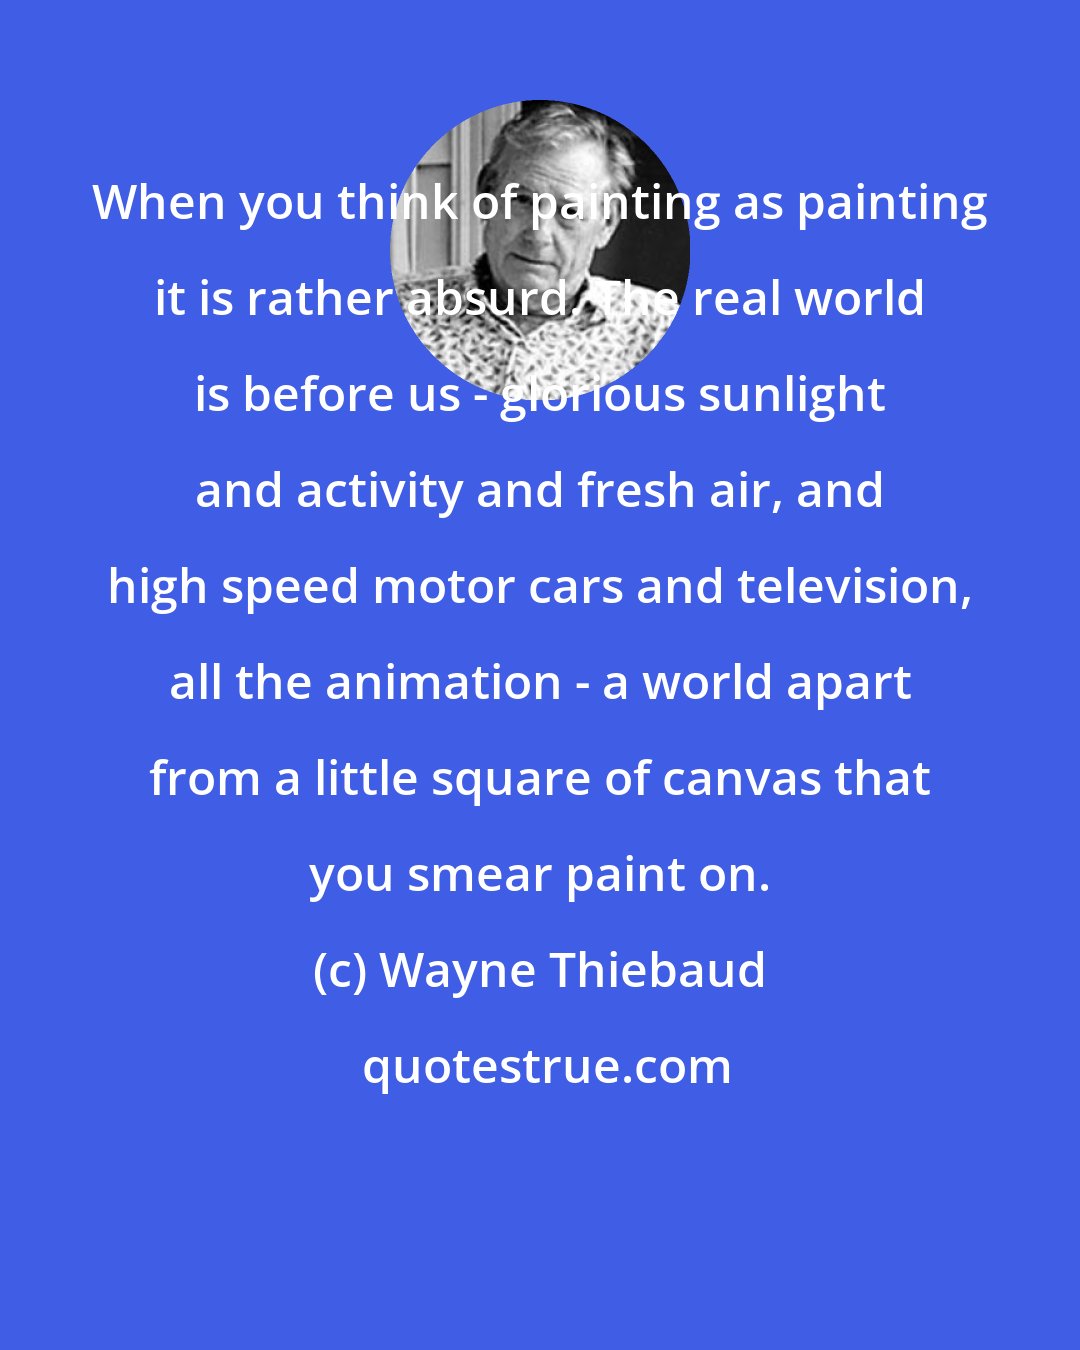 Wayne Thiebaud: When you think of painting as painting it is rather absurd. The real world is before us - glorious sunlight and activity and fresh air, and high speed motor cars and television, all the animation - a world apart from a little square of canvas that you smear paint on.